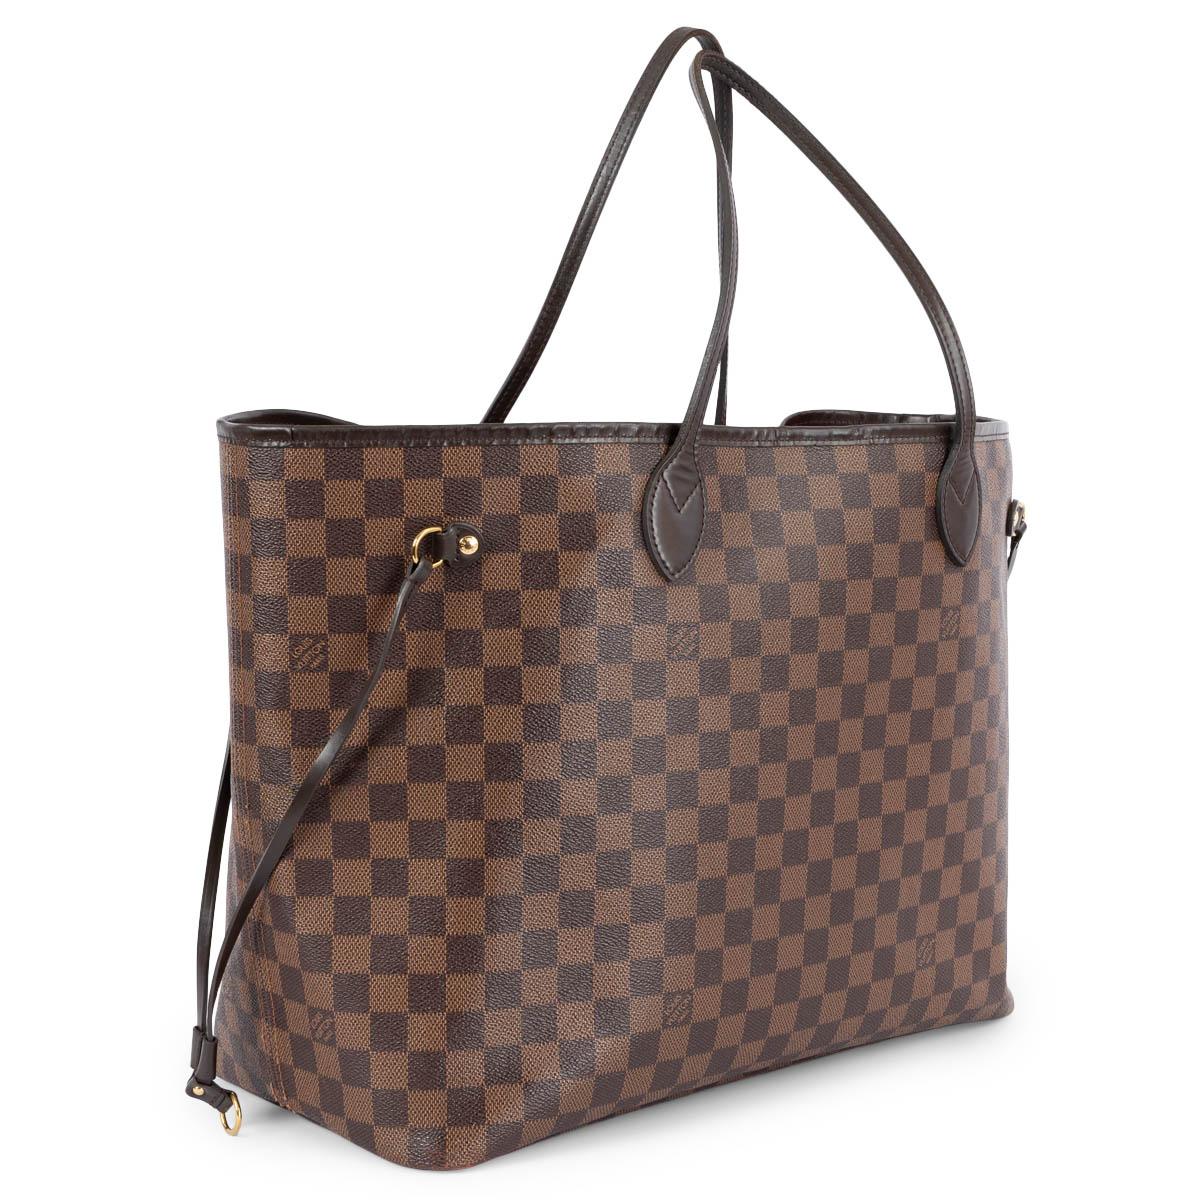 100% authentic Louis Vuitton Neverfull GM shopper in Damier Ebene coated canvas with brown leather trim. Lined in red striped canvas with one zipper pocket against the back. Comes with a detachable zipper pouch.